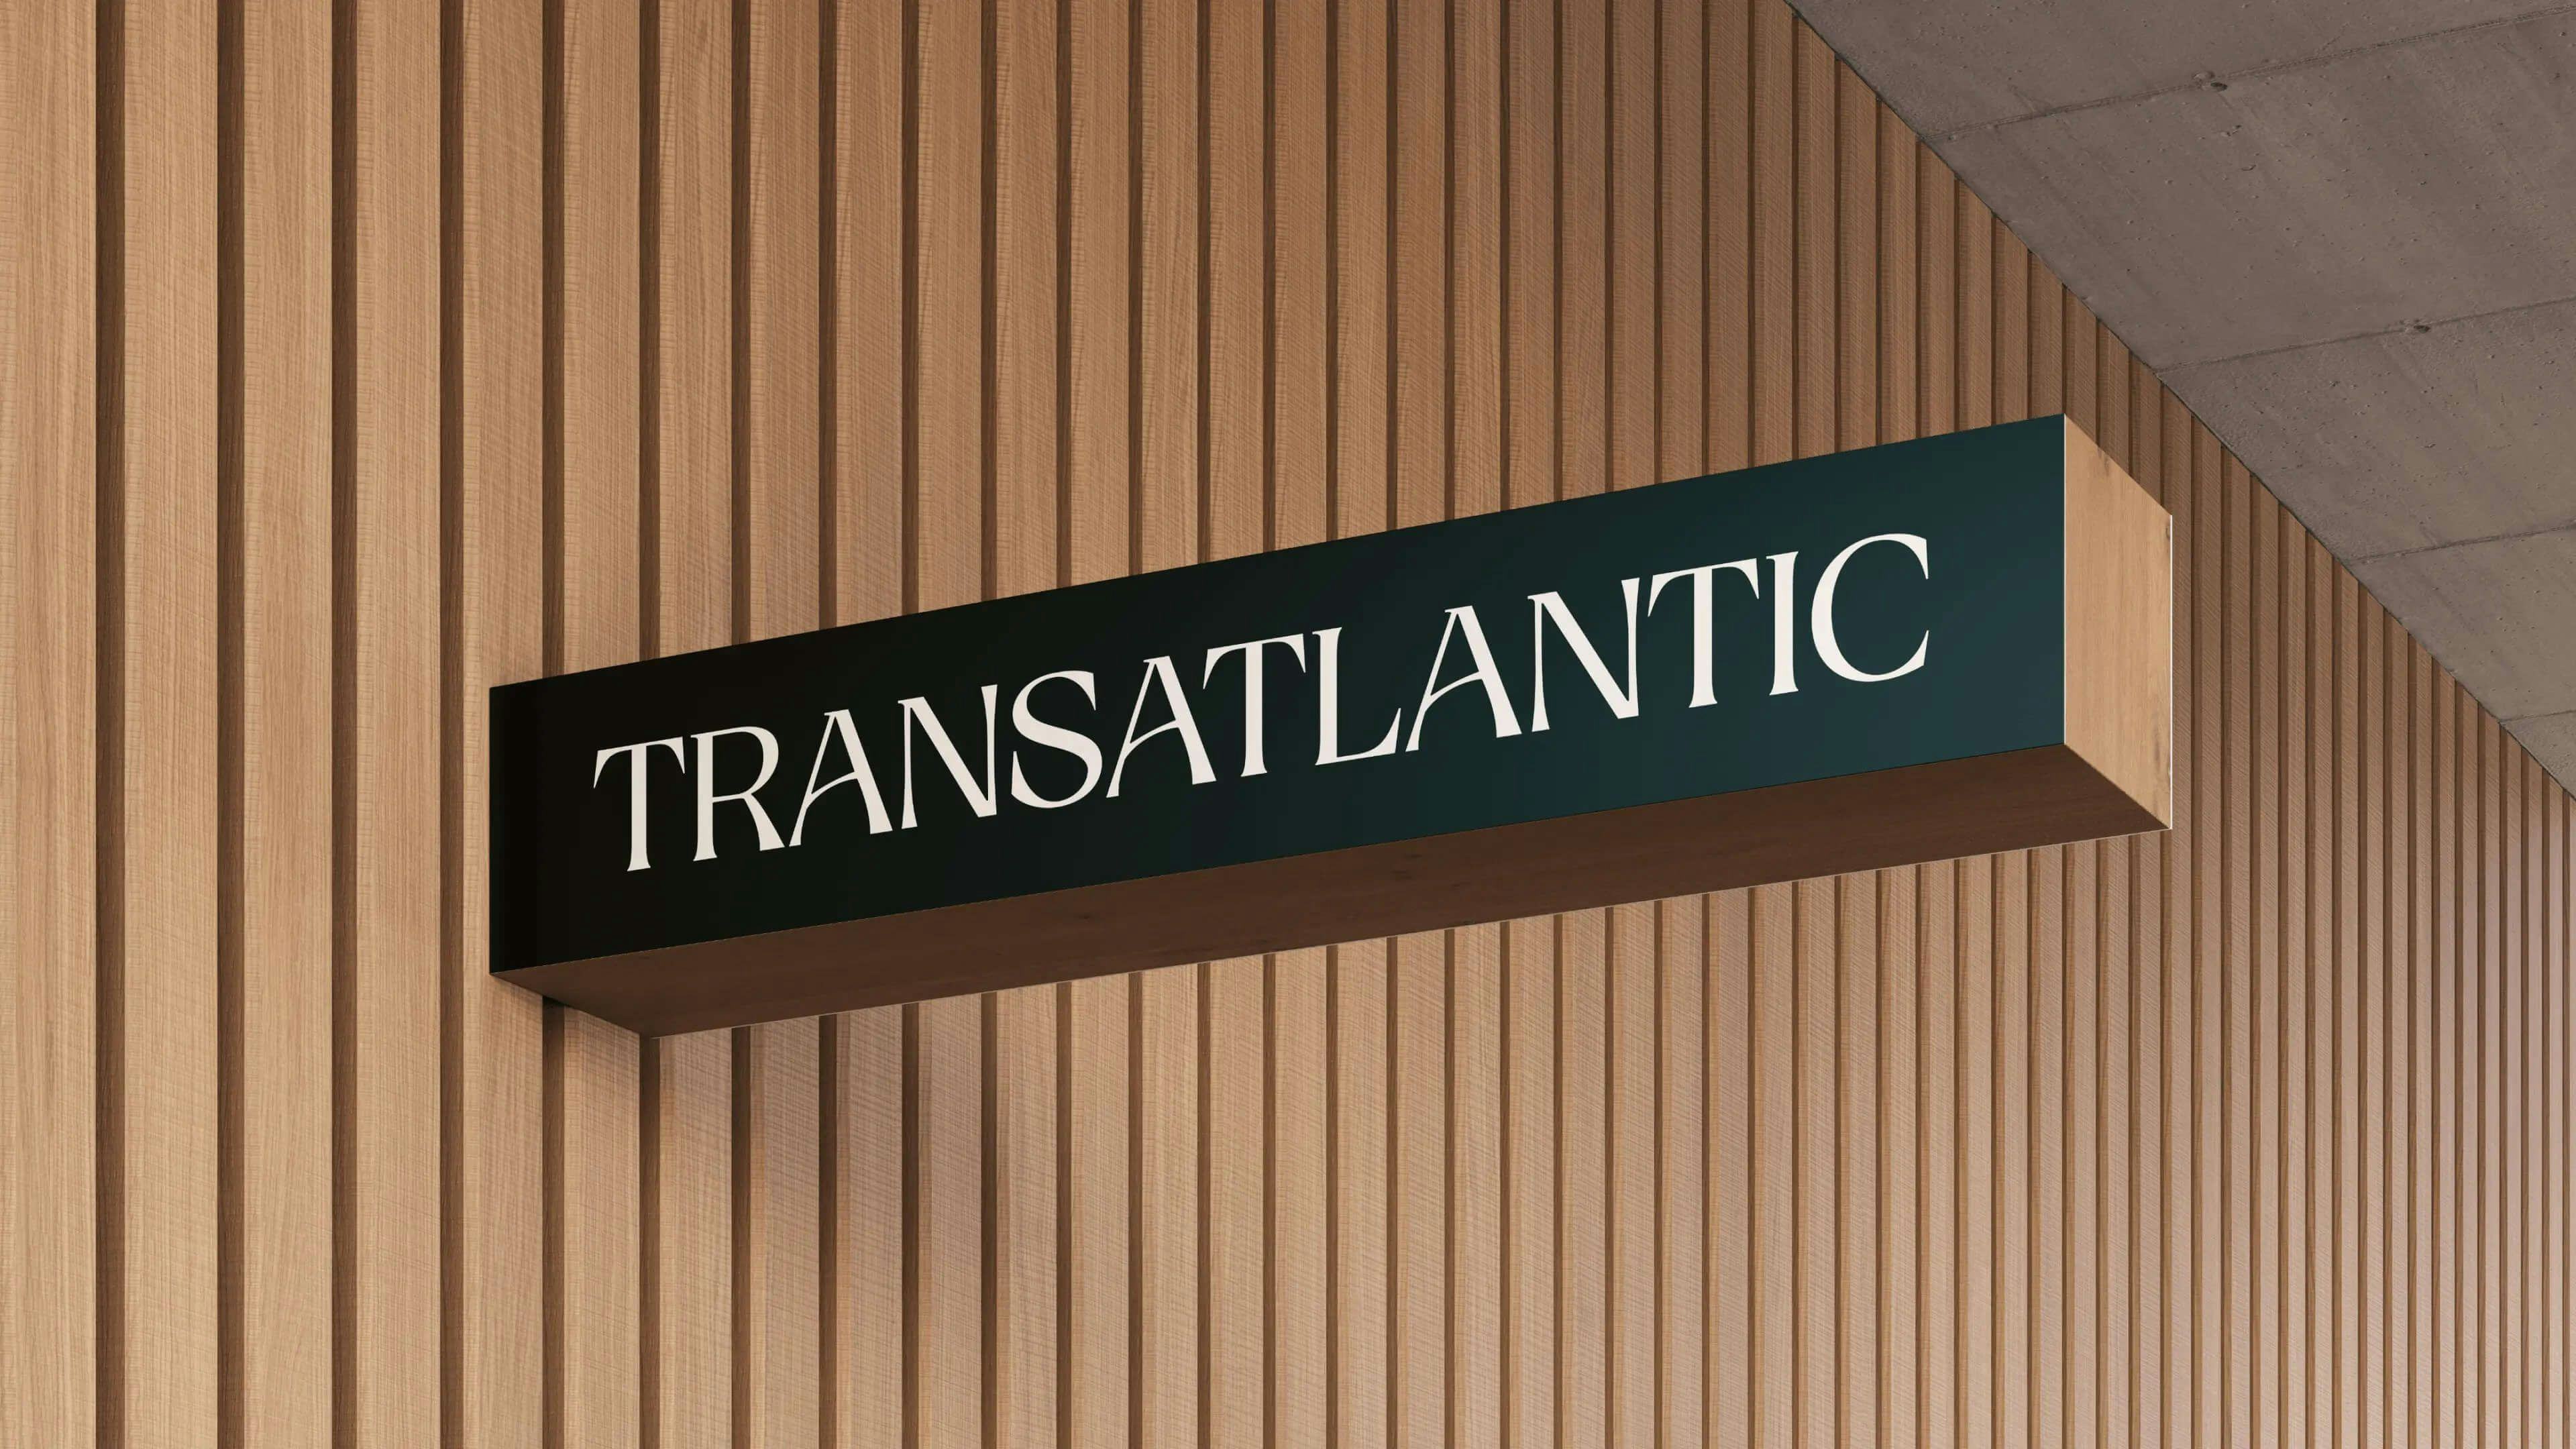 Transatlantic Jewels brand identity and signage design and logo by View Source